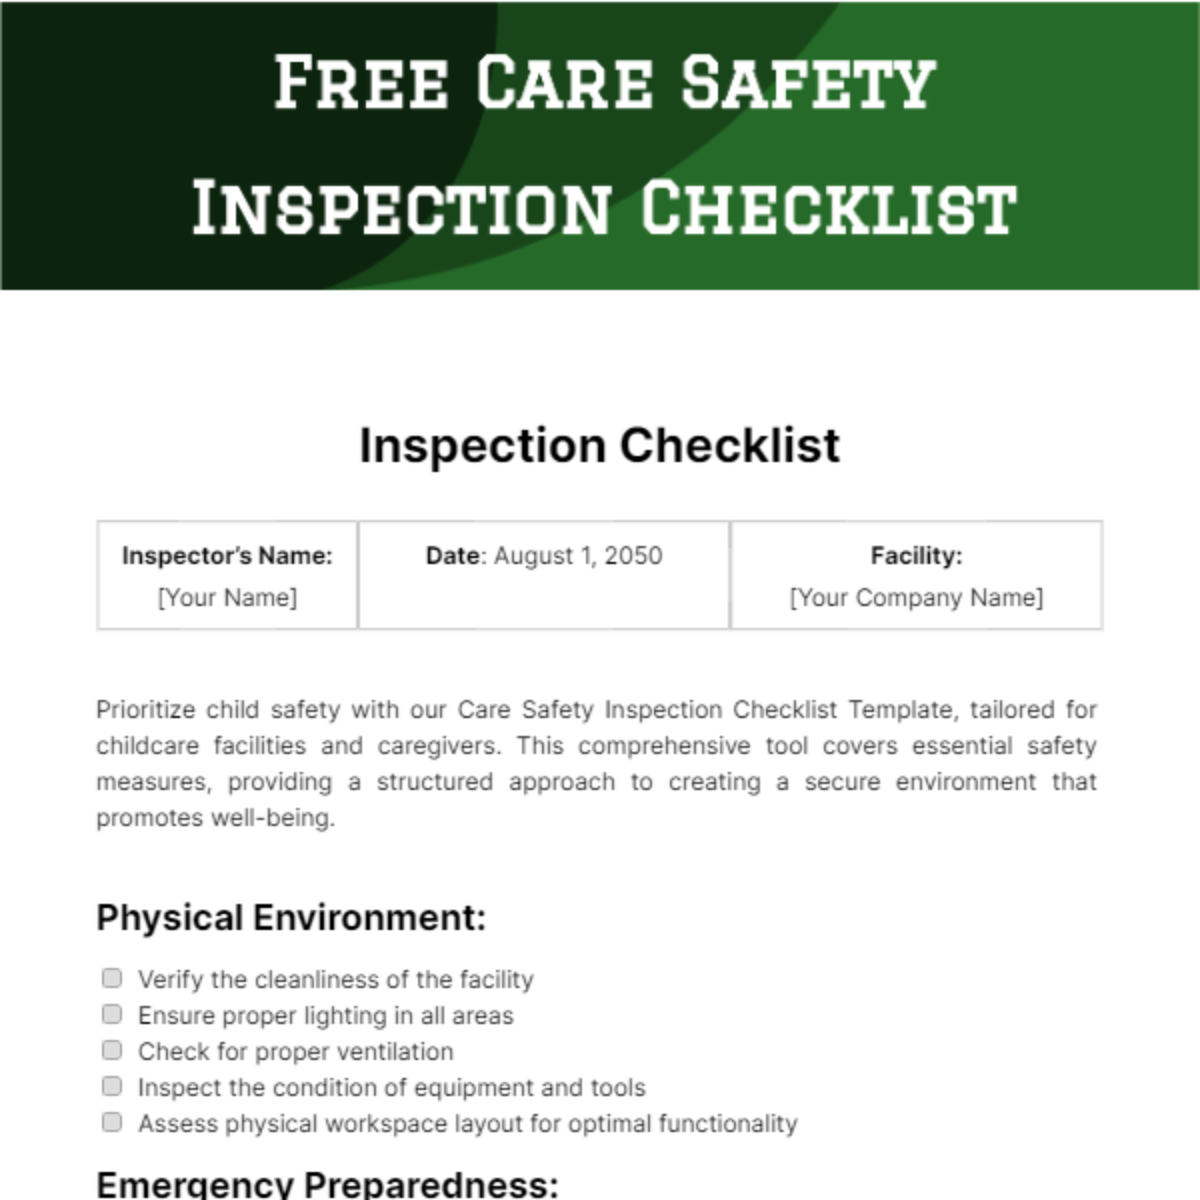 Free Care Safety Inspection Checklist Template